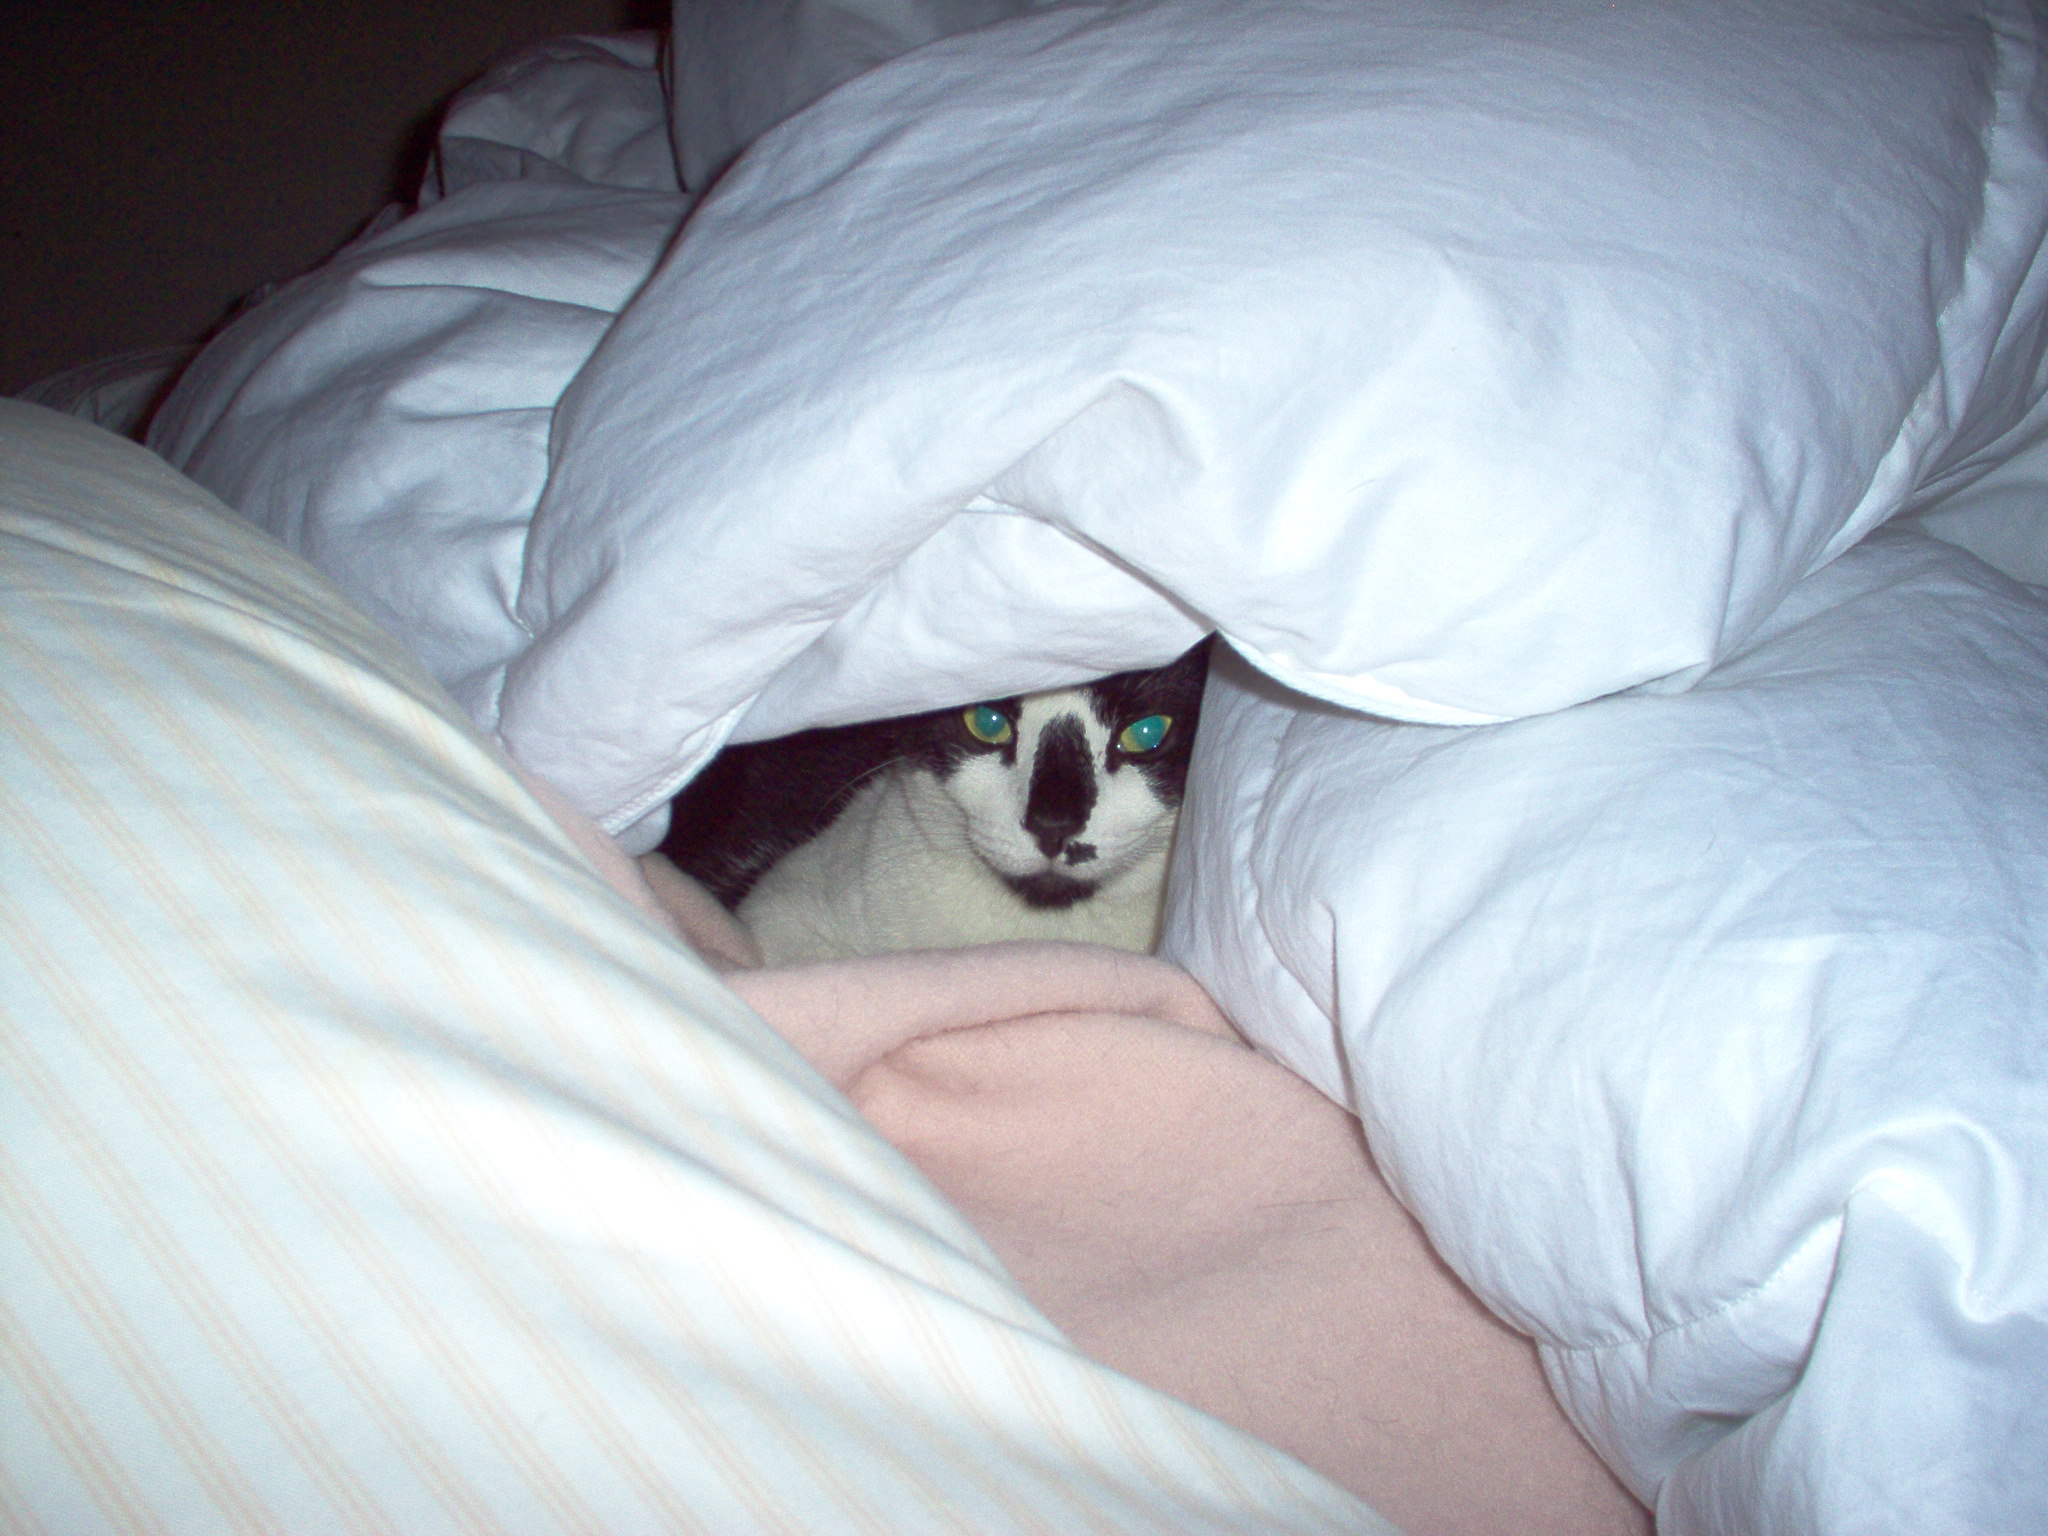 Sleeping Under The Covers? (thyroid, names, water, purrs) - Cats